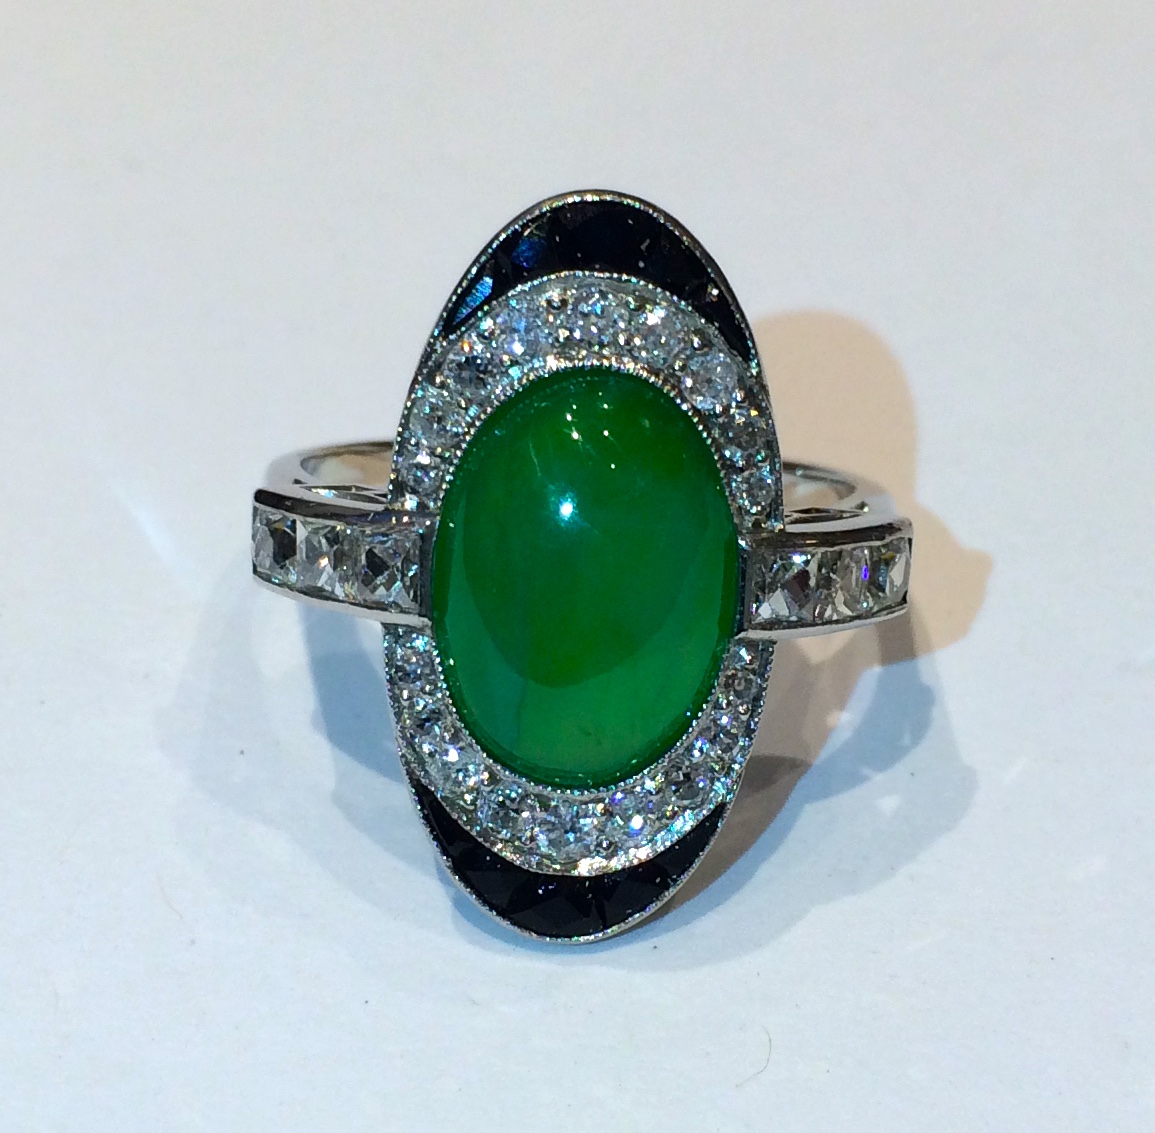 French Art Deco ring set with a fine jadeite oval cabochon, faceted and caliber cut onyx, and further set with 18 round diamonds and six square French-cut diamonds all set in a millegrain platinum mount, c. 1920’s